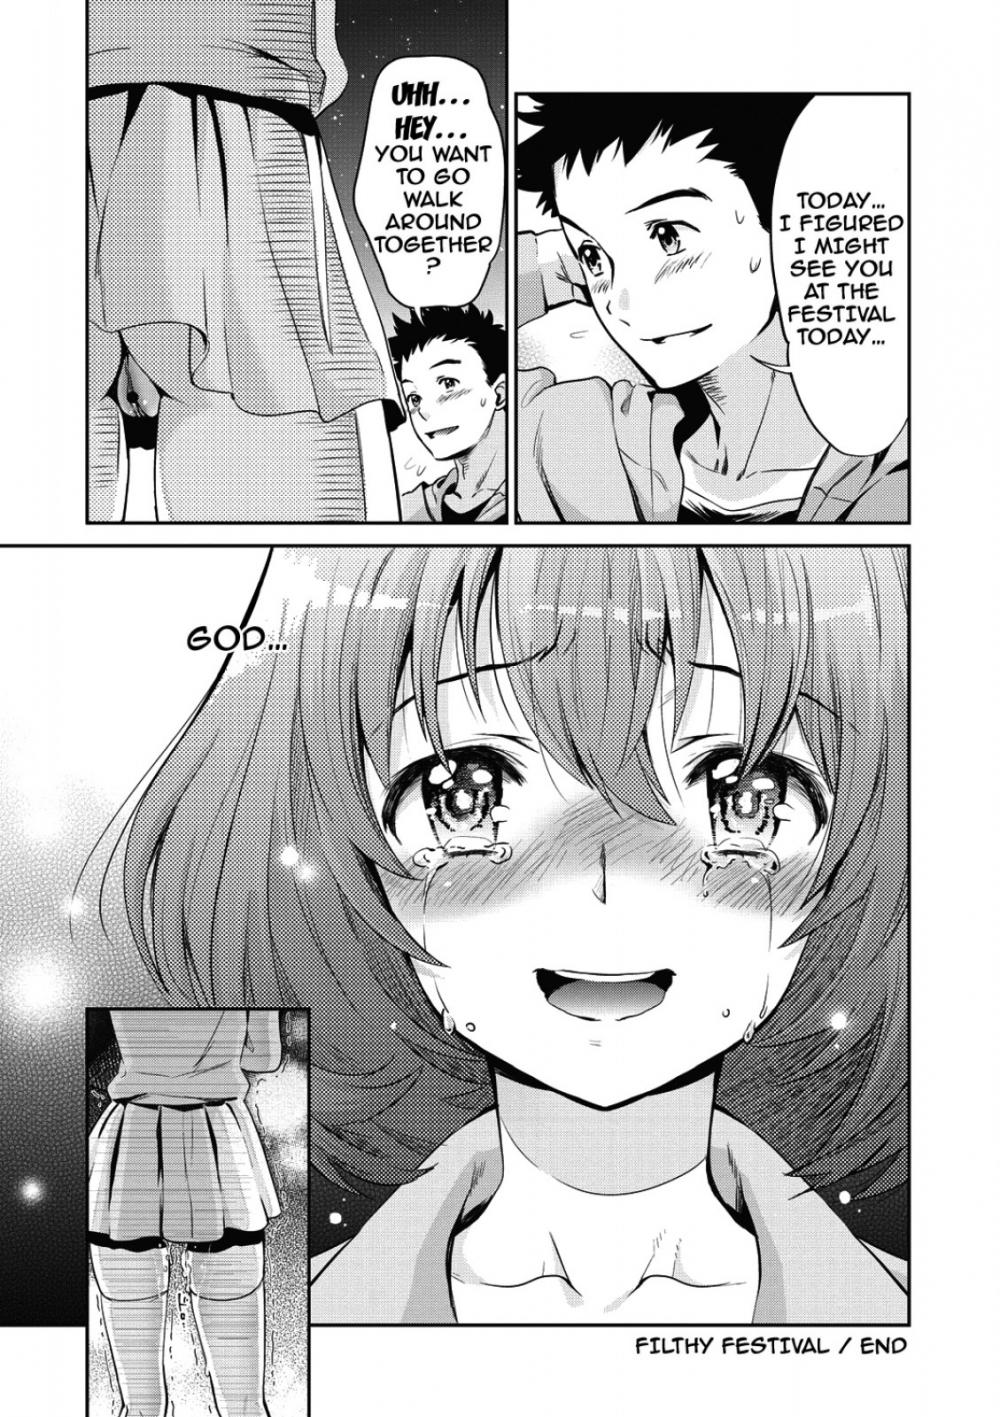 Hentai Manga Comic-From Now On She'll Be Doing NTR-Chapter 6-18